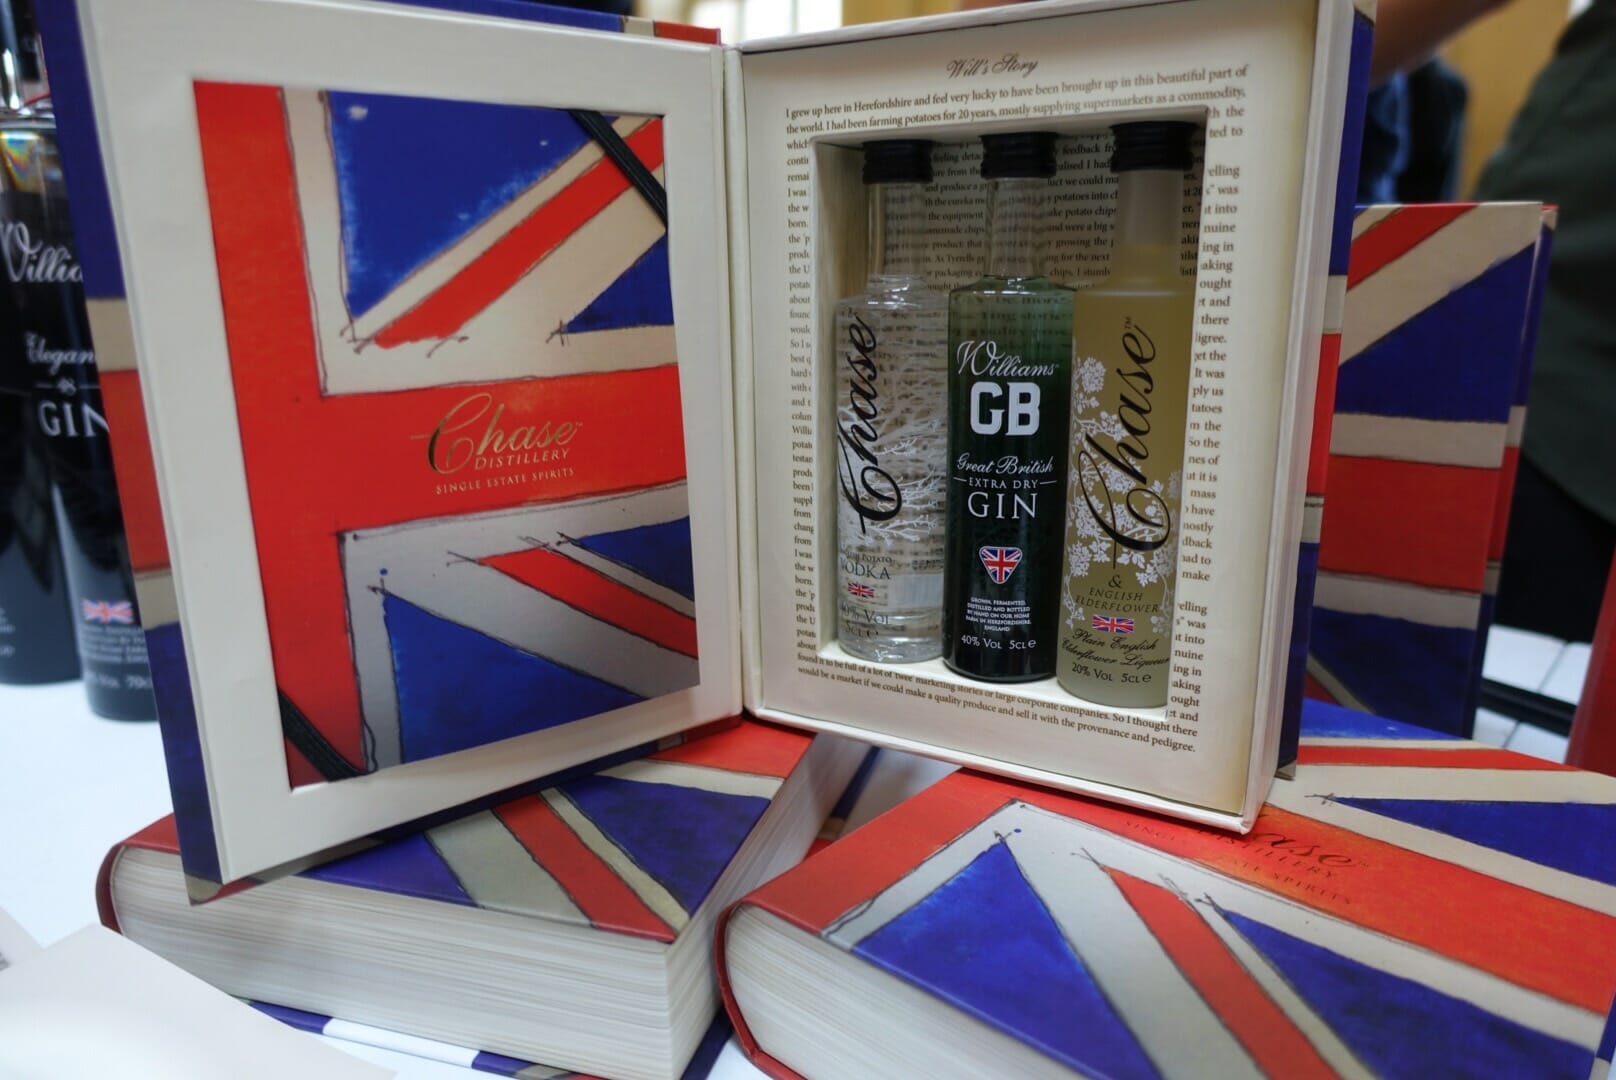 Ginspired gifts for the Gin Obsessed on What's Katie Doing? blog